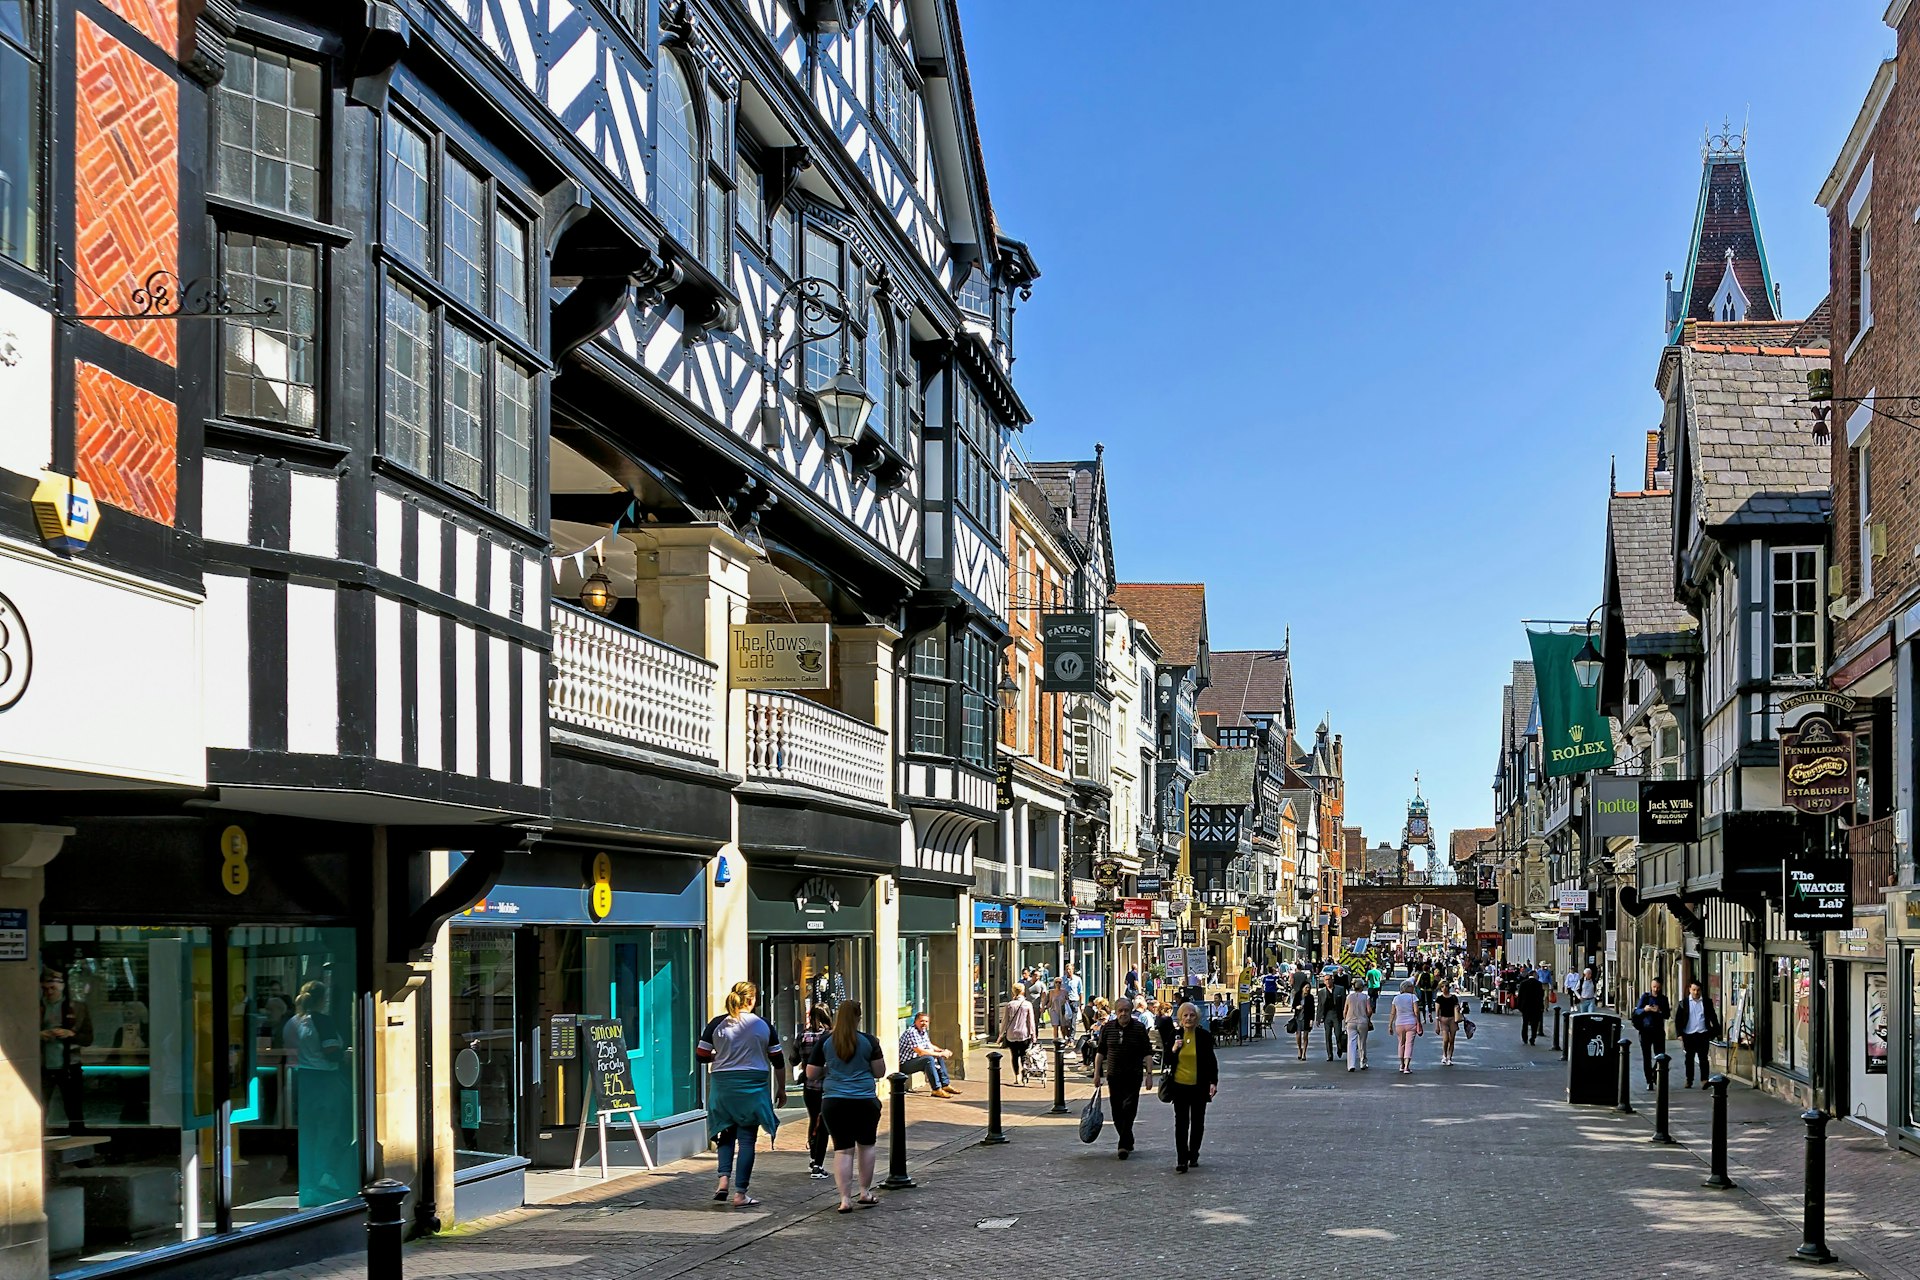 View along the main street in the centre of Chester, Cheshire, UK.  Shops can be seen on either side of the road and people can be seen walking and sitting on benches. The rows of upper level shops are pictured on left. 